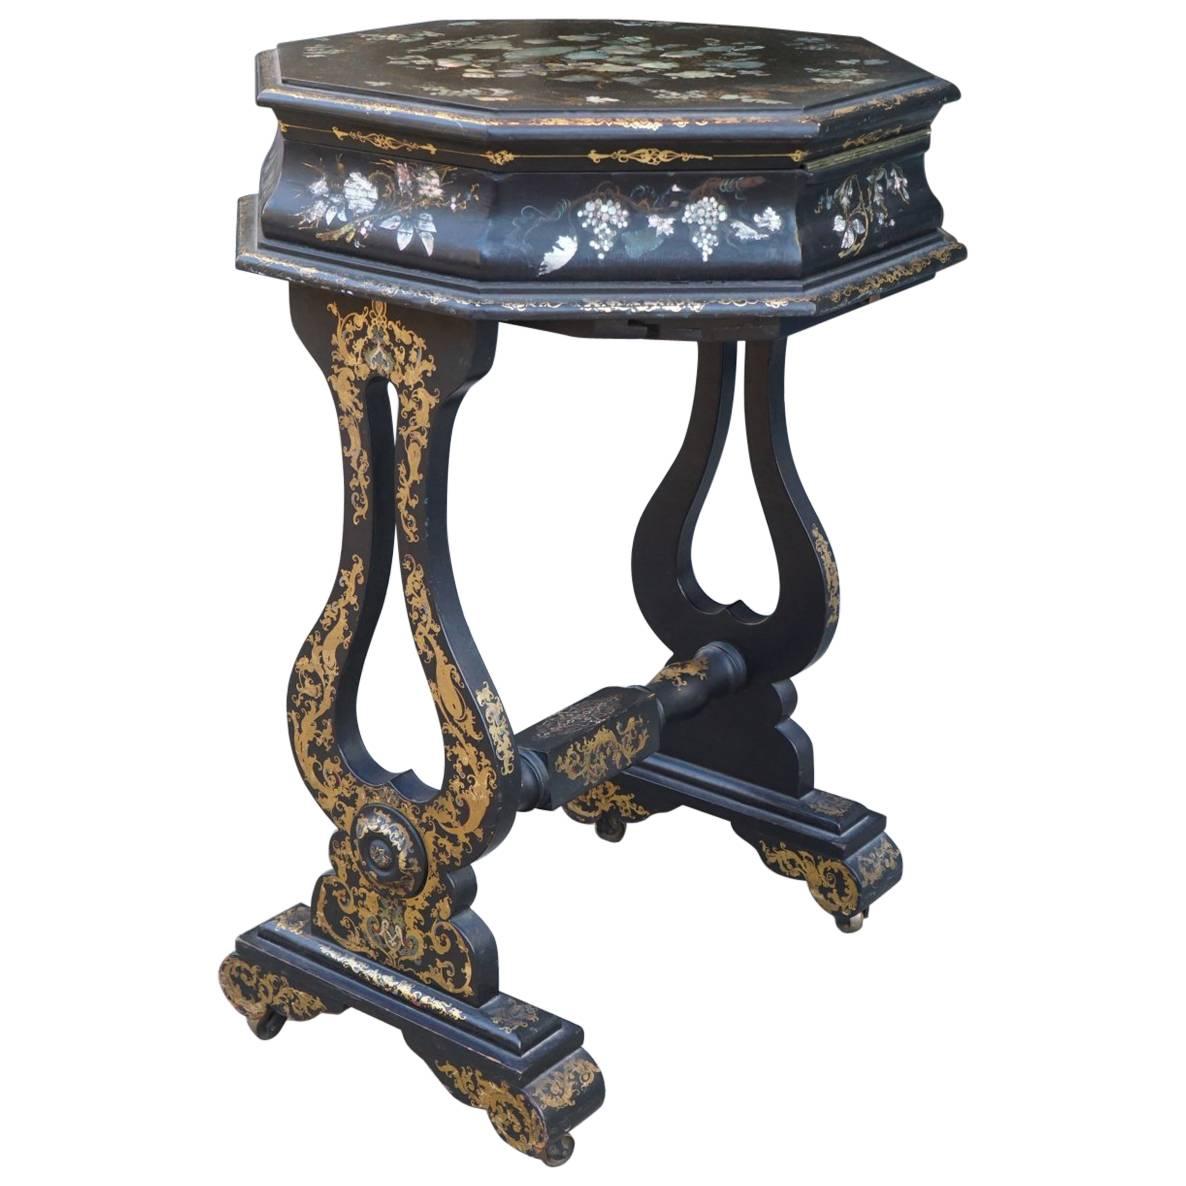 Victorian Papier Mâché and Mother-of-Pearl Inlayed Work Table